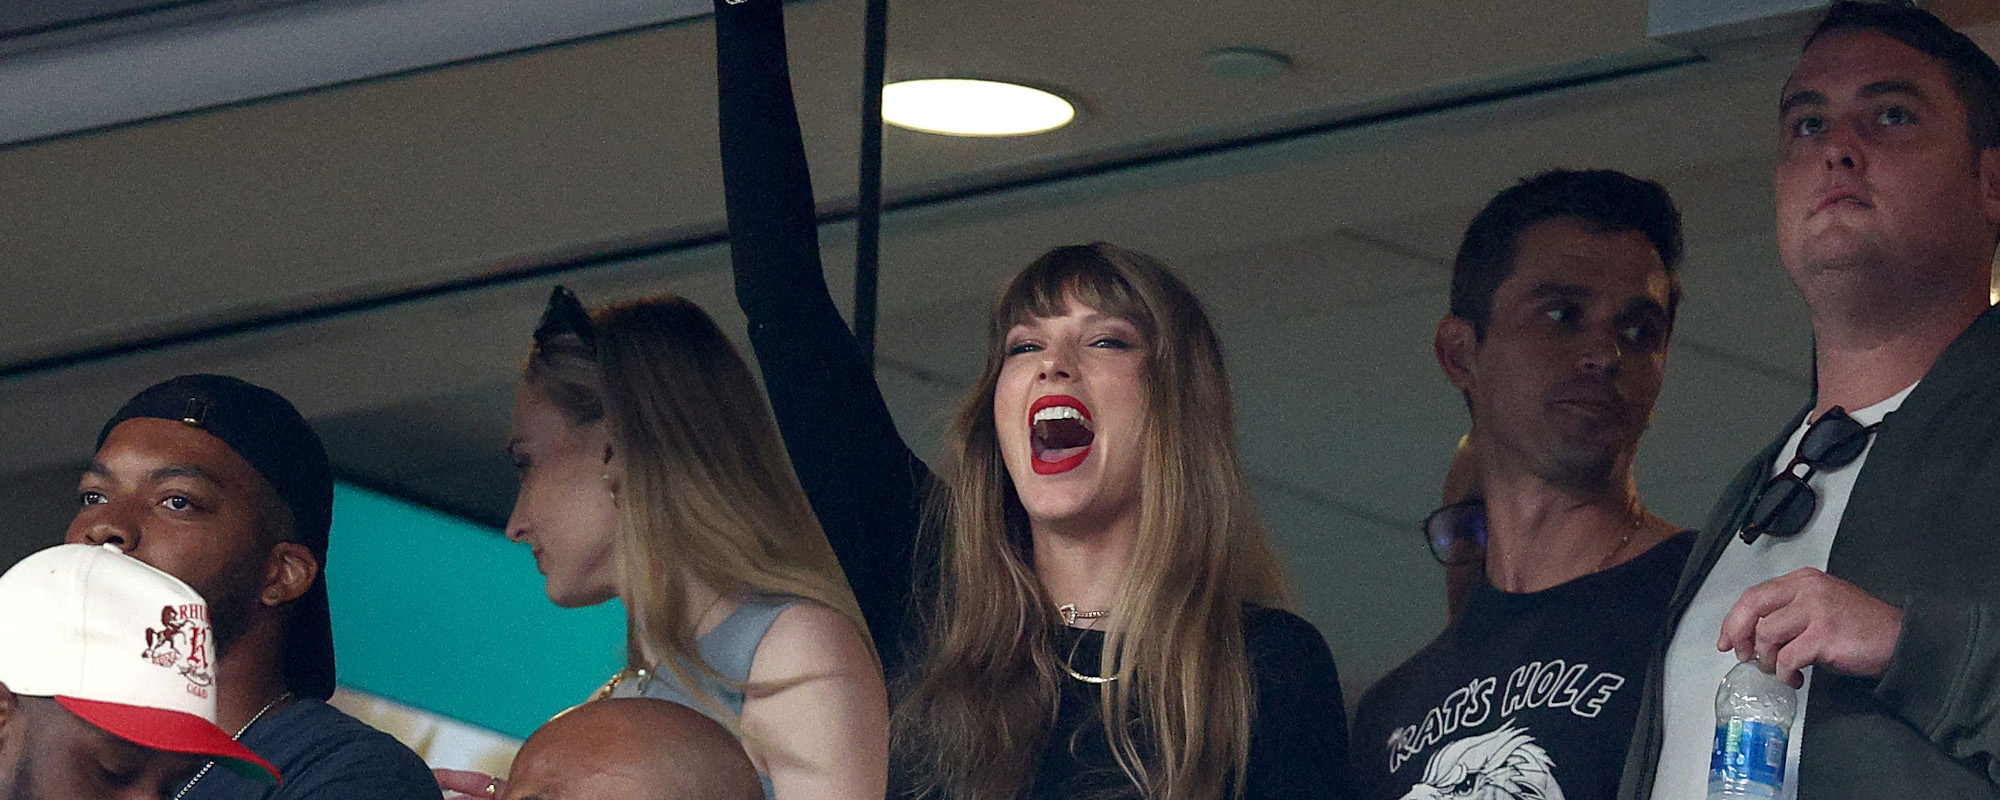 The Taylor Swift Effect: The NFL Has a Lot to Thank the Popstar For